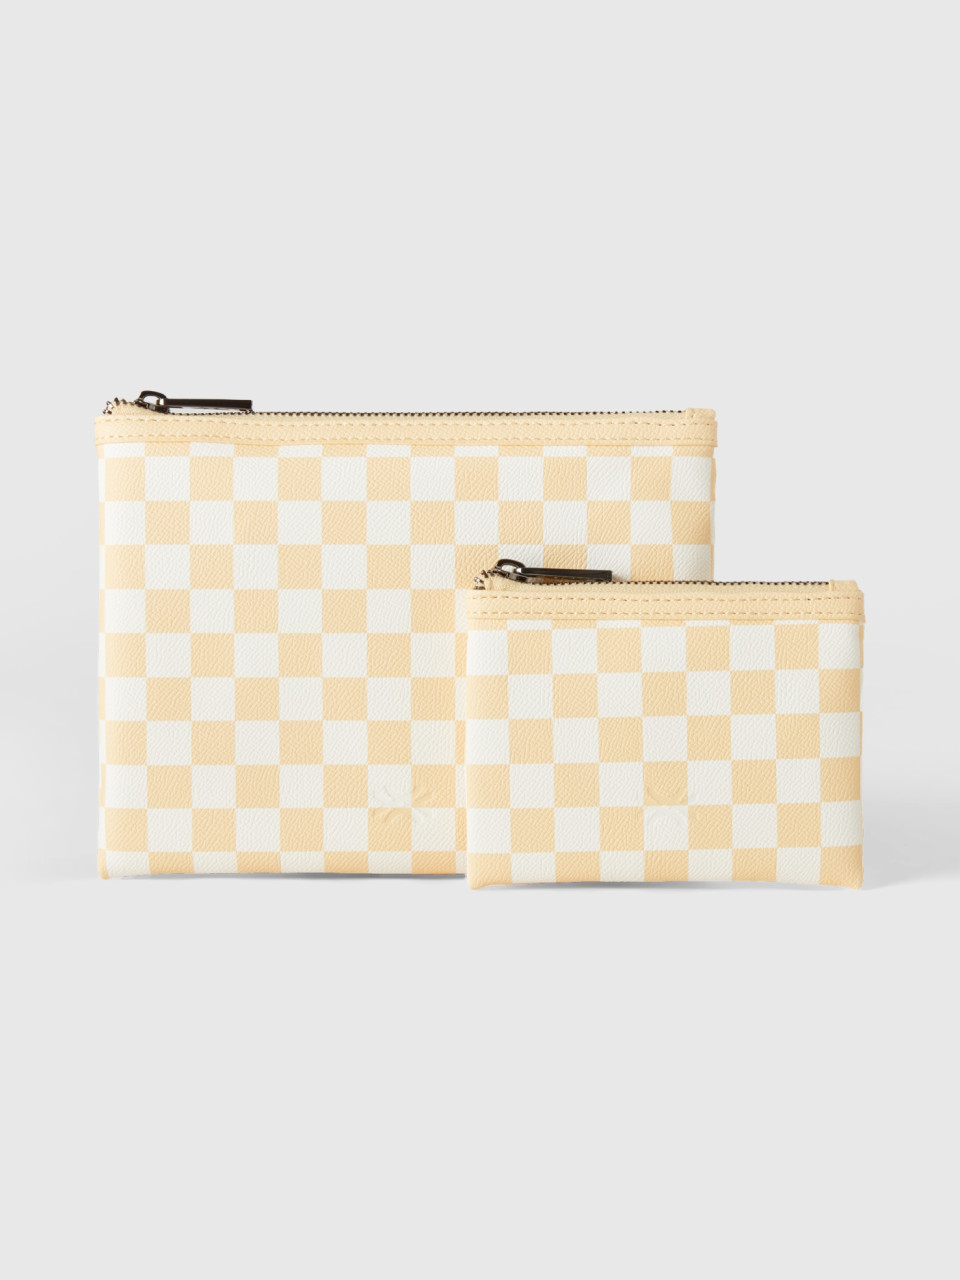 Benetton, Two Bags With White And Yellow Checkers, Multi-color, Women